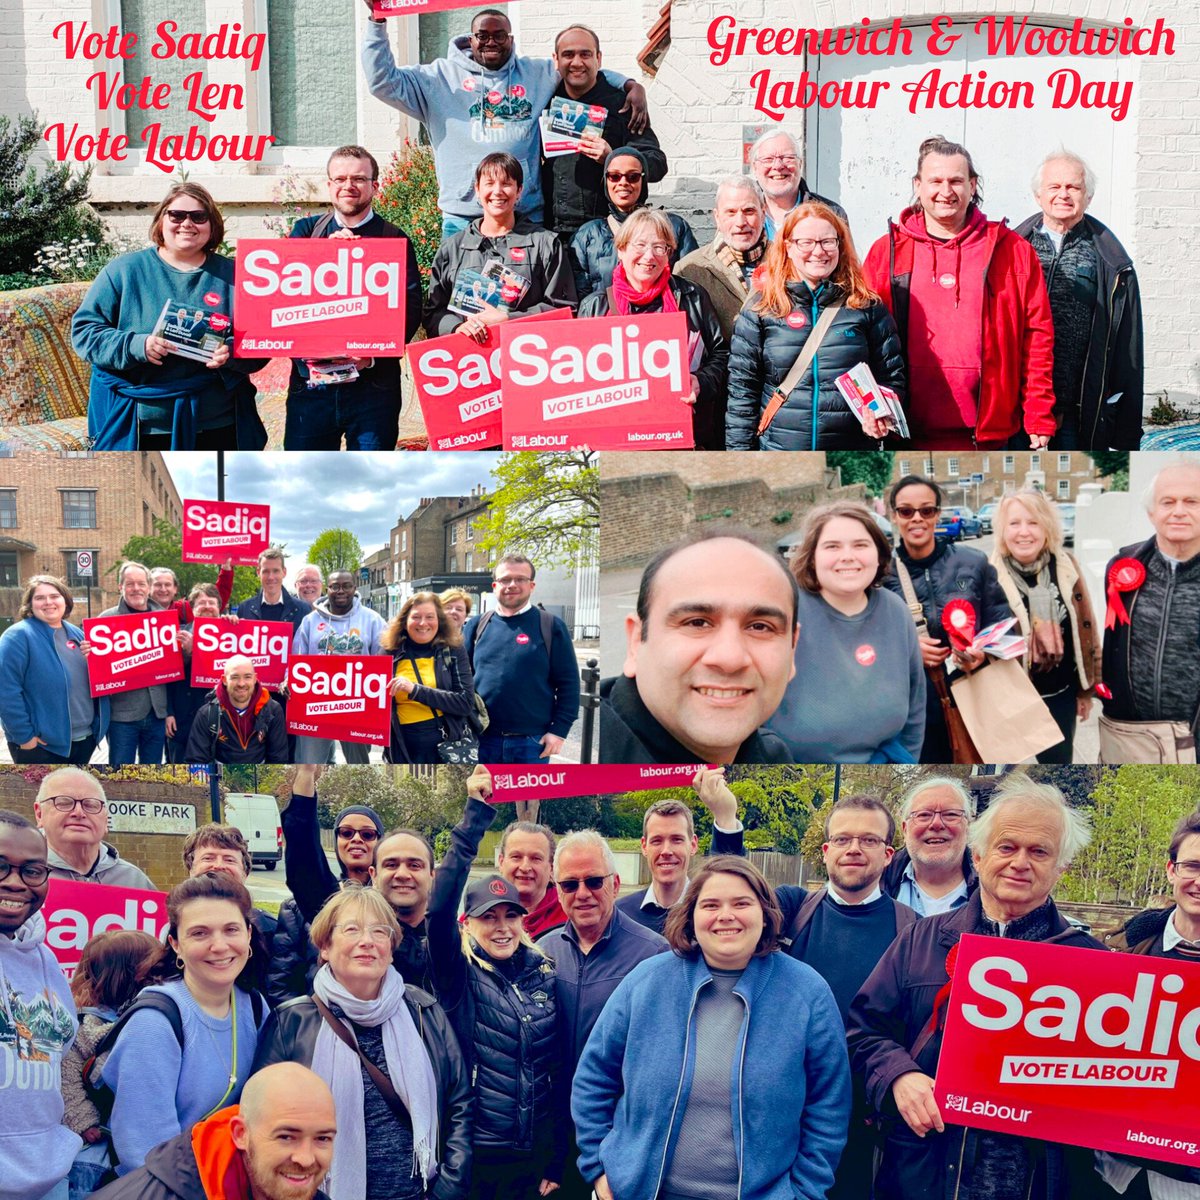 Fantastic response at today’s three campaign sessions during the @GWLabour Action Day. There’s strong support for @Len_Duvall and @SadiqKhan. Sadiq’s message, “A fairer, safer, greener London for everyone,” is resonating powerfully. All three votes for @UKLabour on May 2 🌹🌹🌹